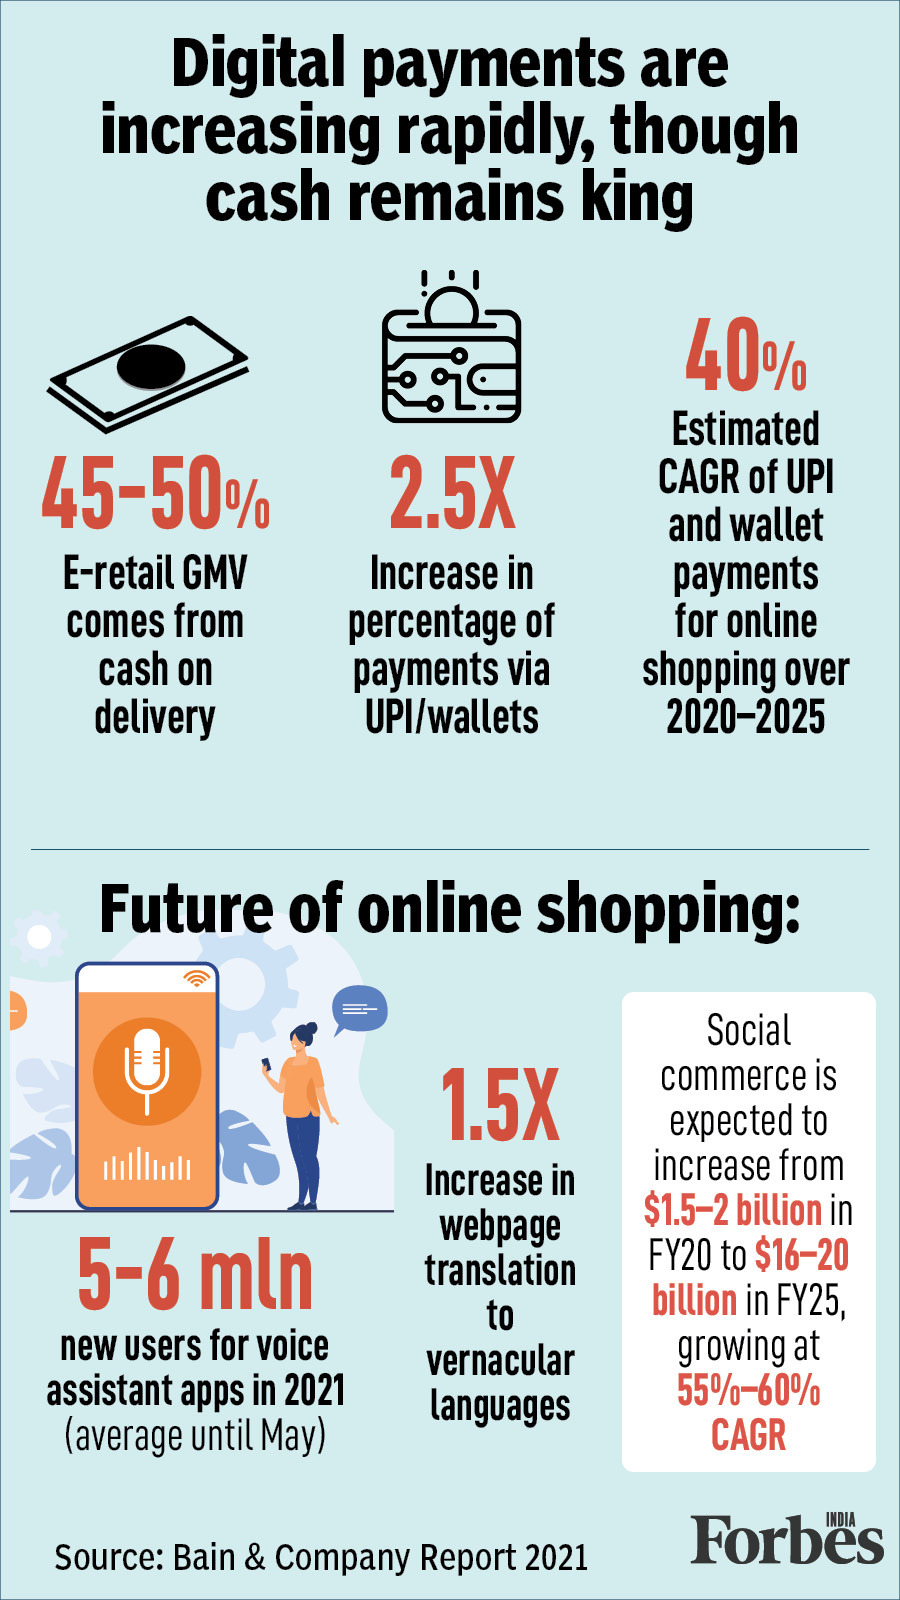 How Indians shop online: Done in 9.5 minutes, images over descriptions, voice gaining popularity